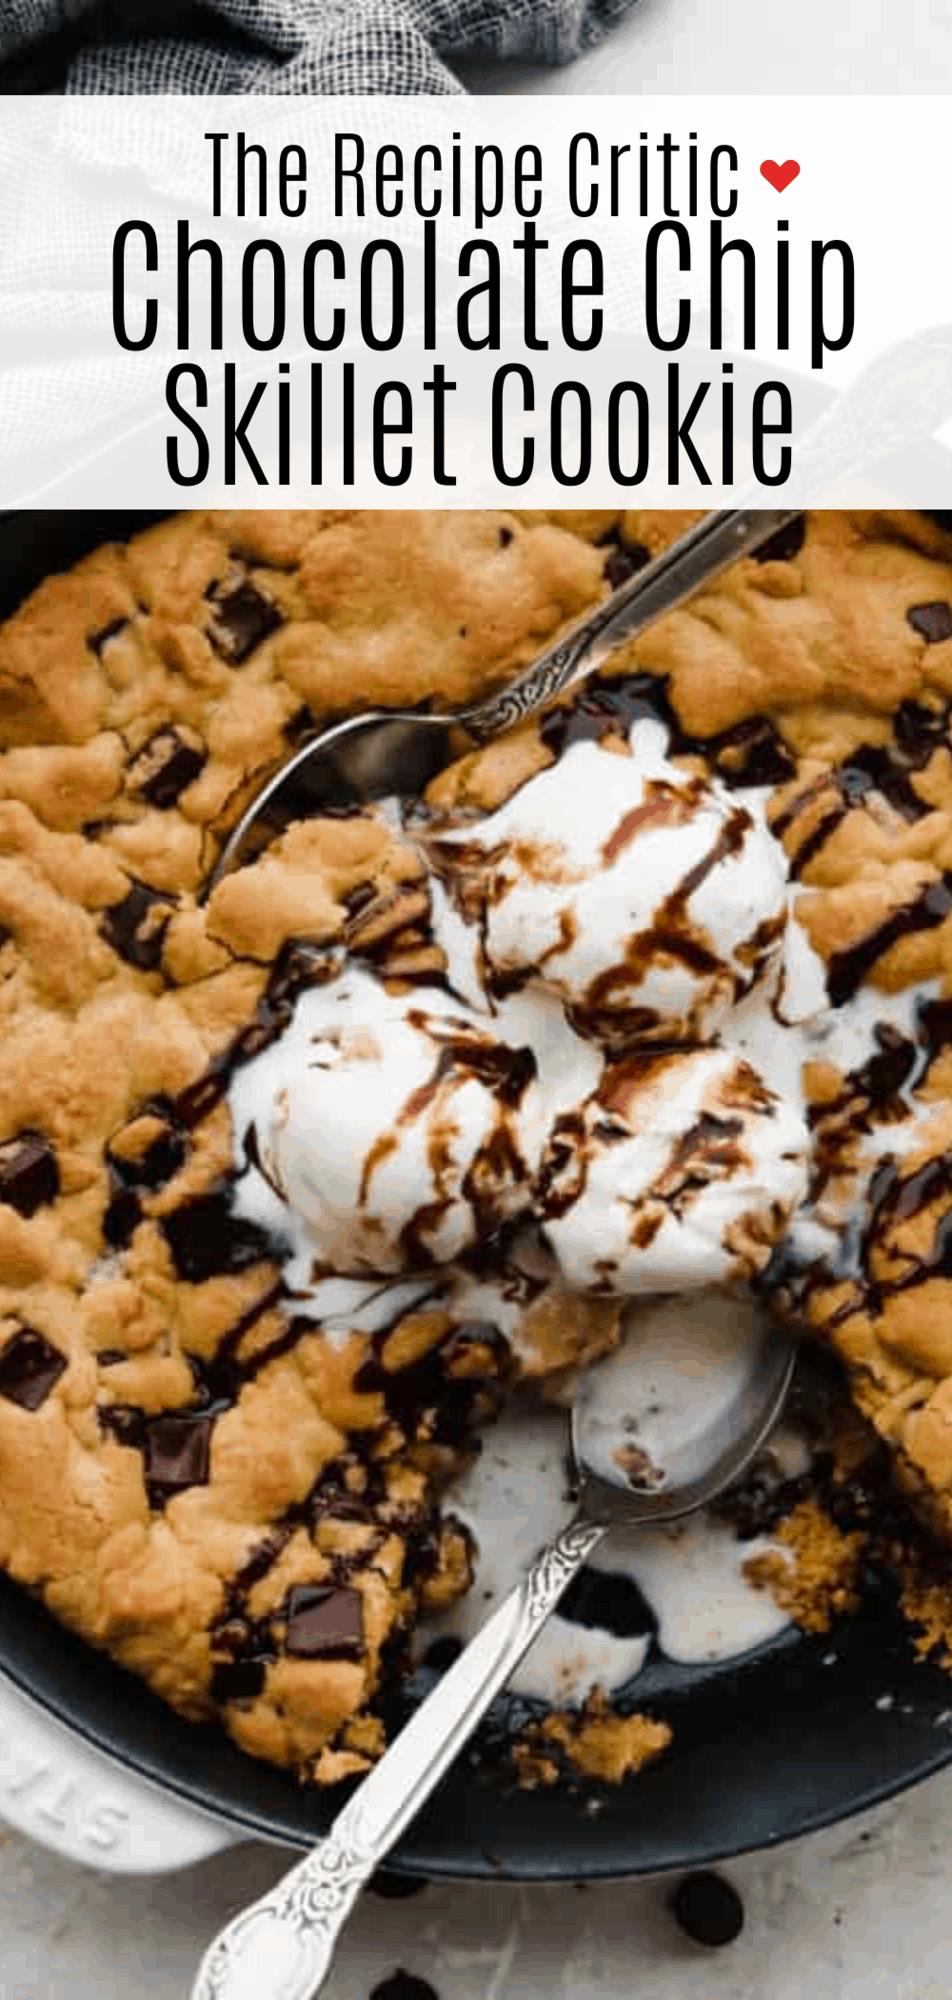 https://therecipecritic.com/wp-content/uploads/2021/09/Skillet-Chocolate-Chip-Cookie-1.png